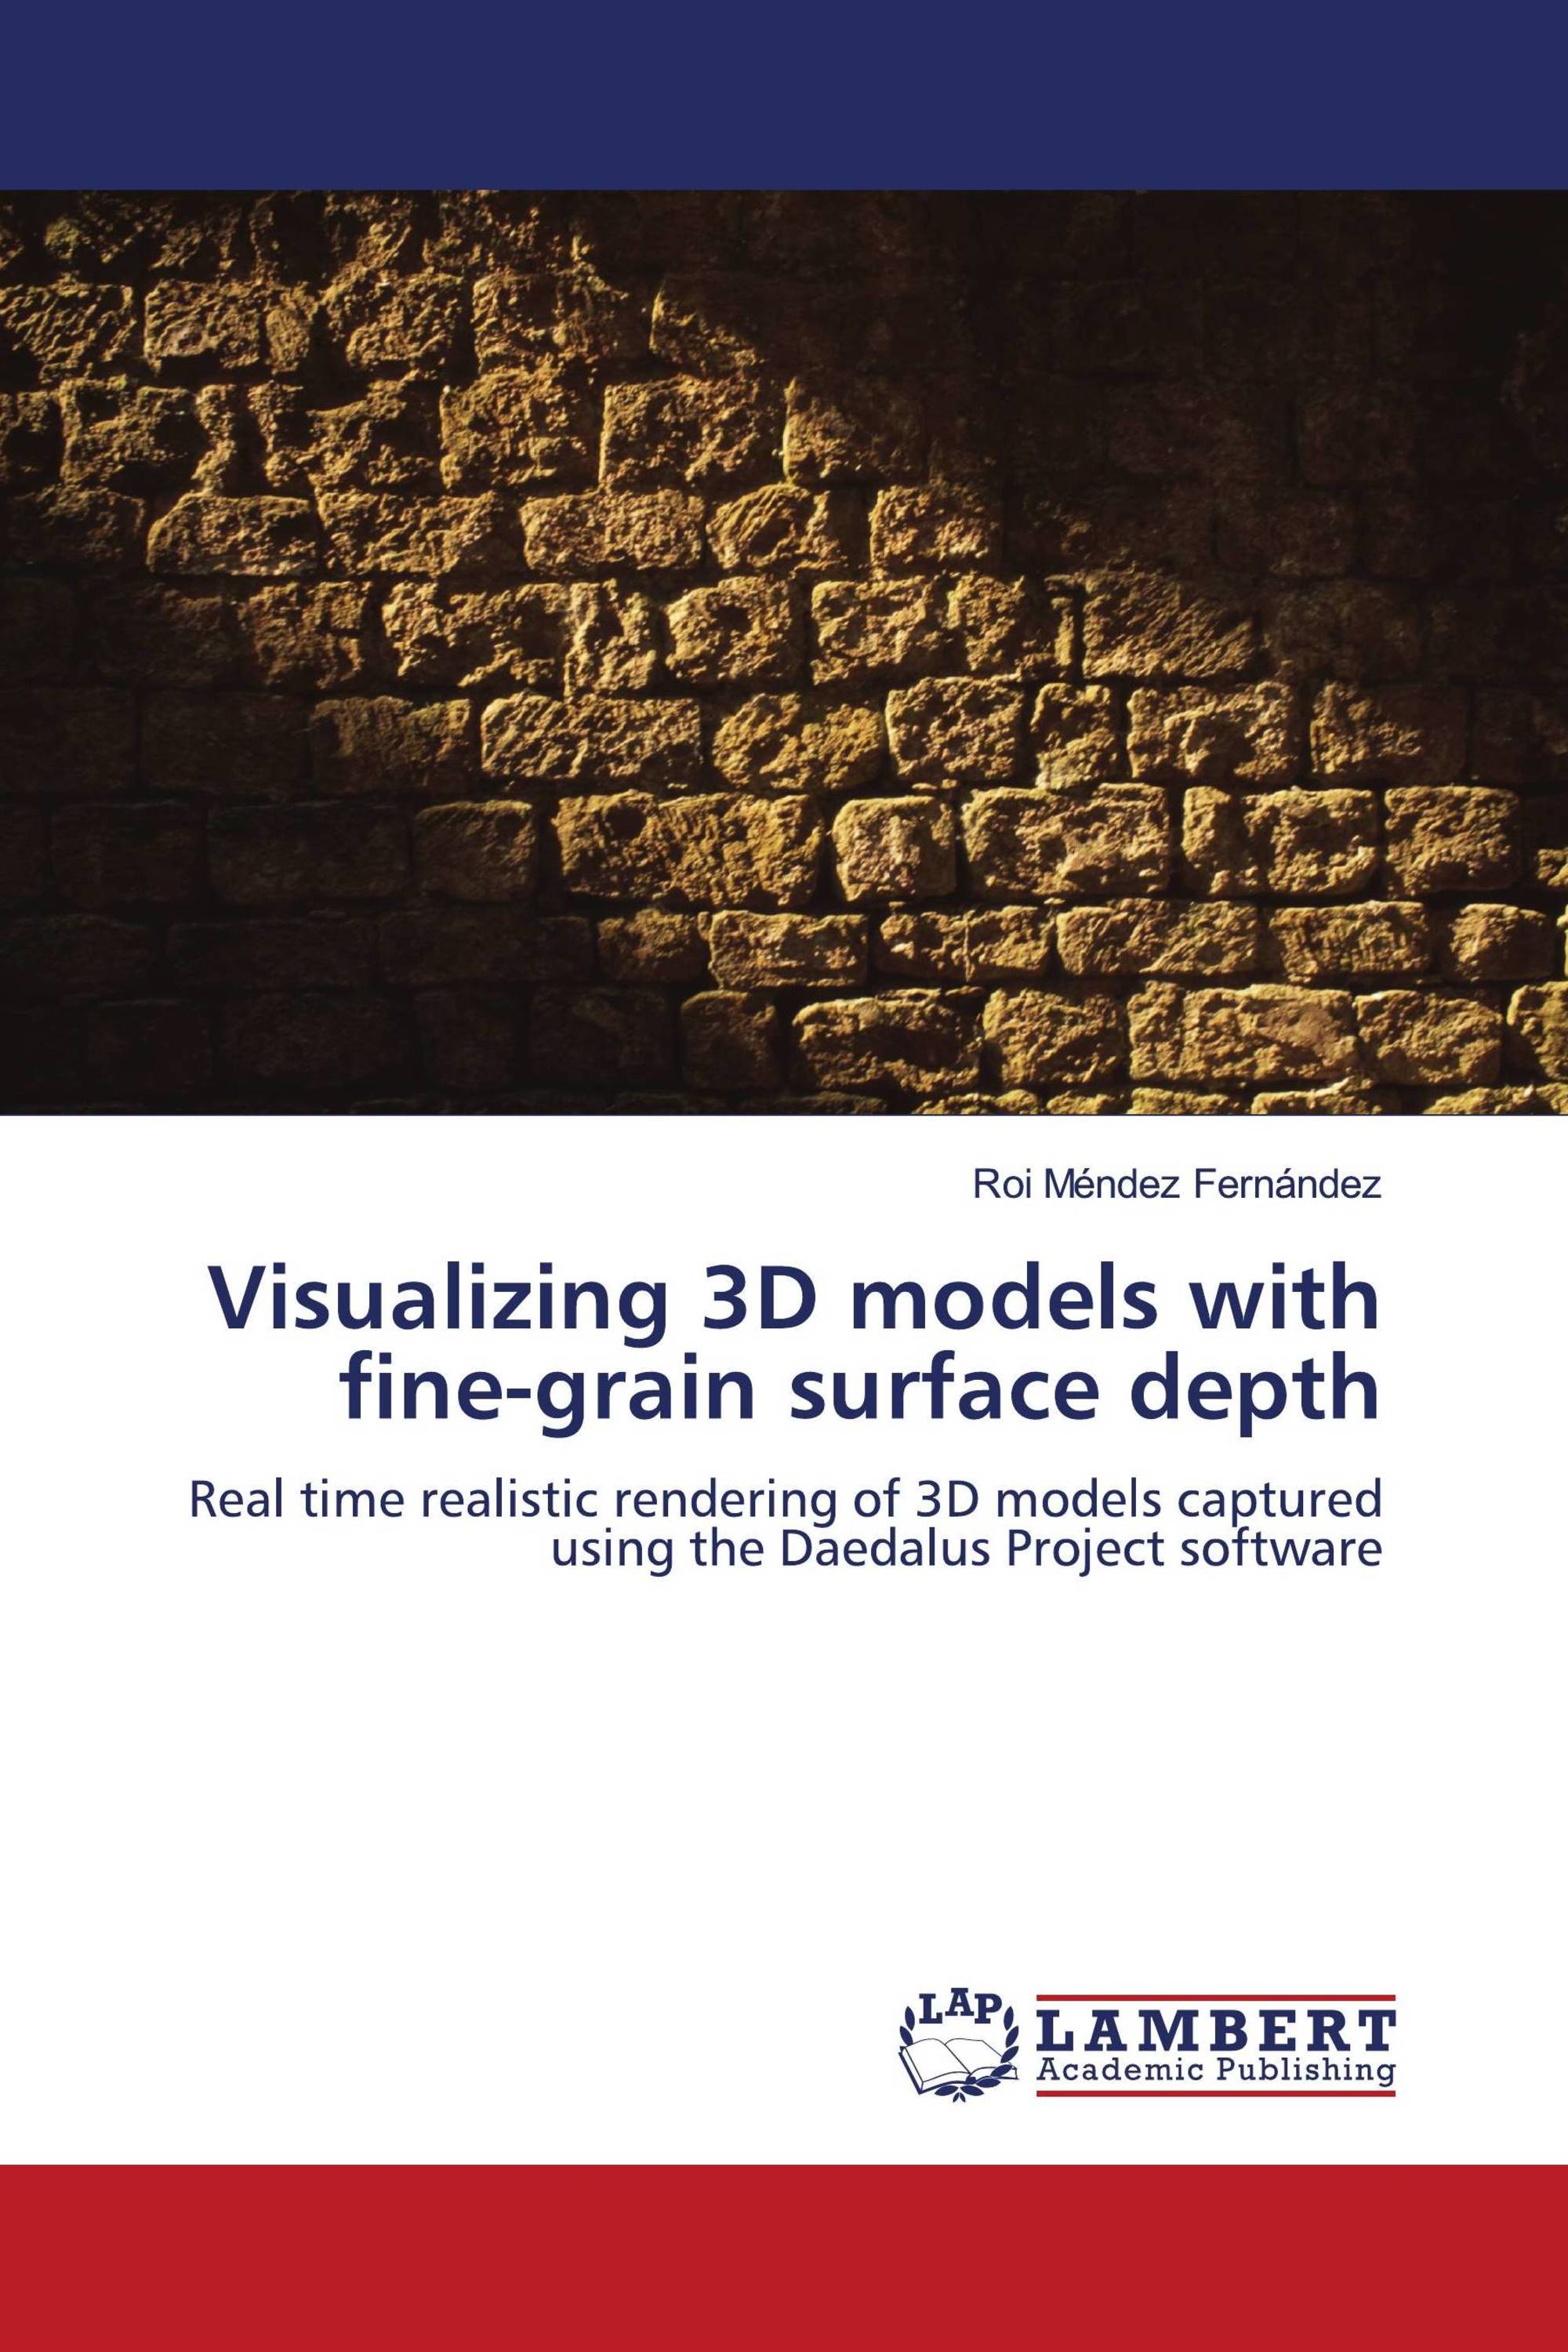 Visualizing 3D models with fine-grain surface depth